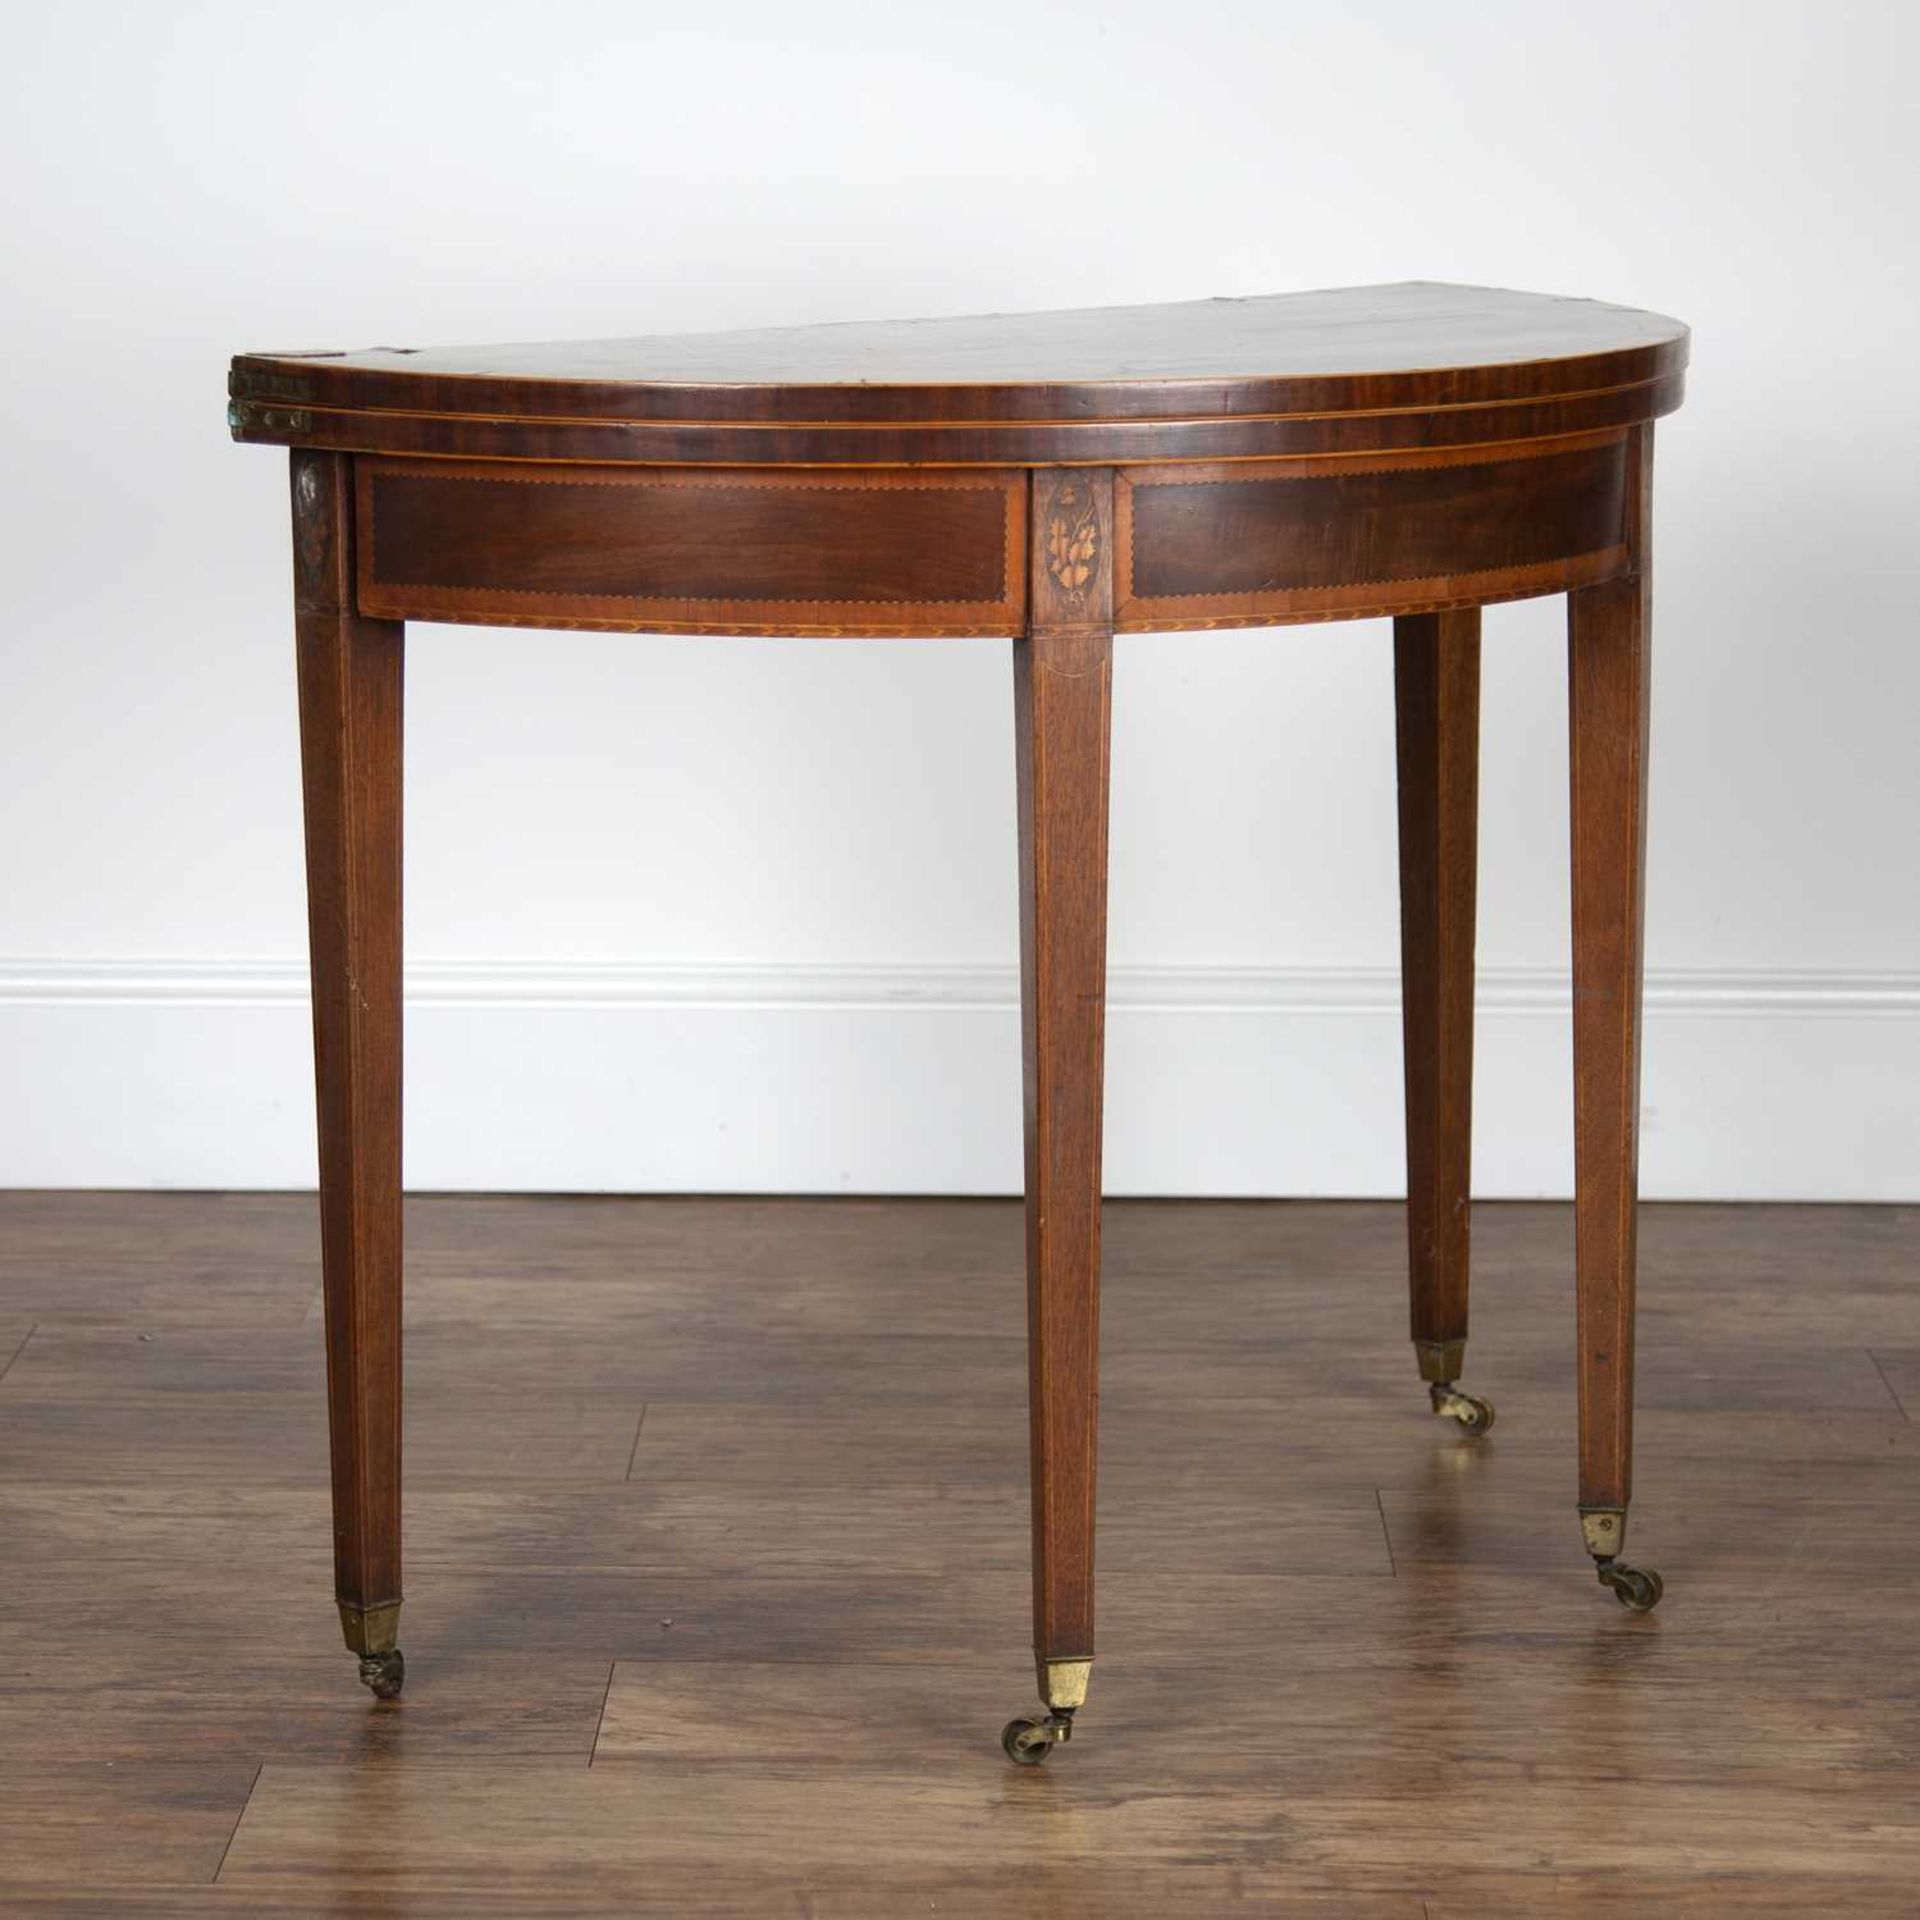 Mahogany marquetry inlaid card table George III, with fold over top and green baize lining, on - Image 2 of 5